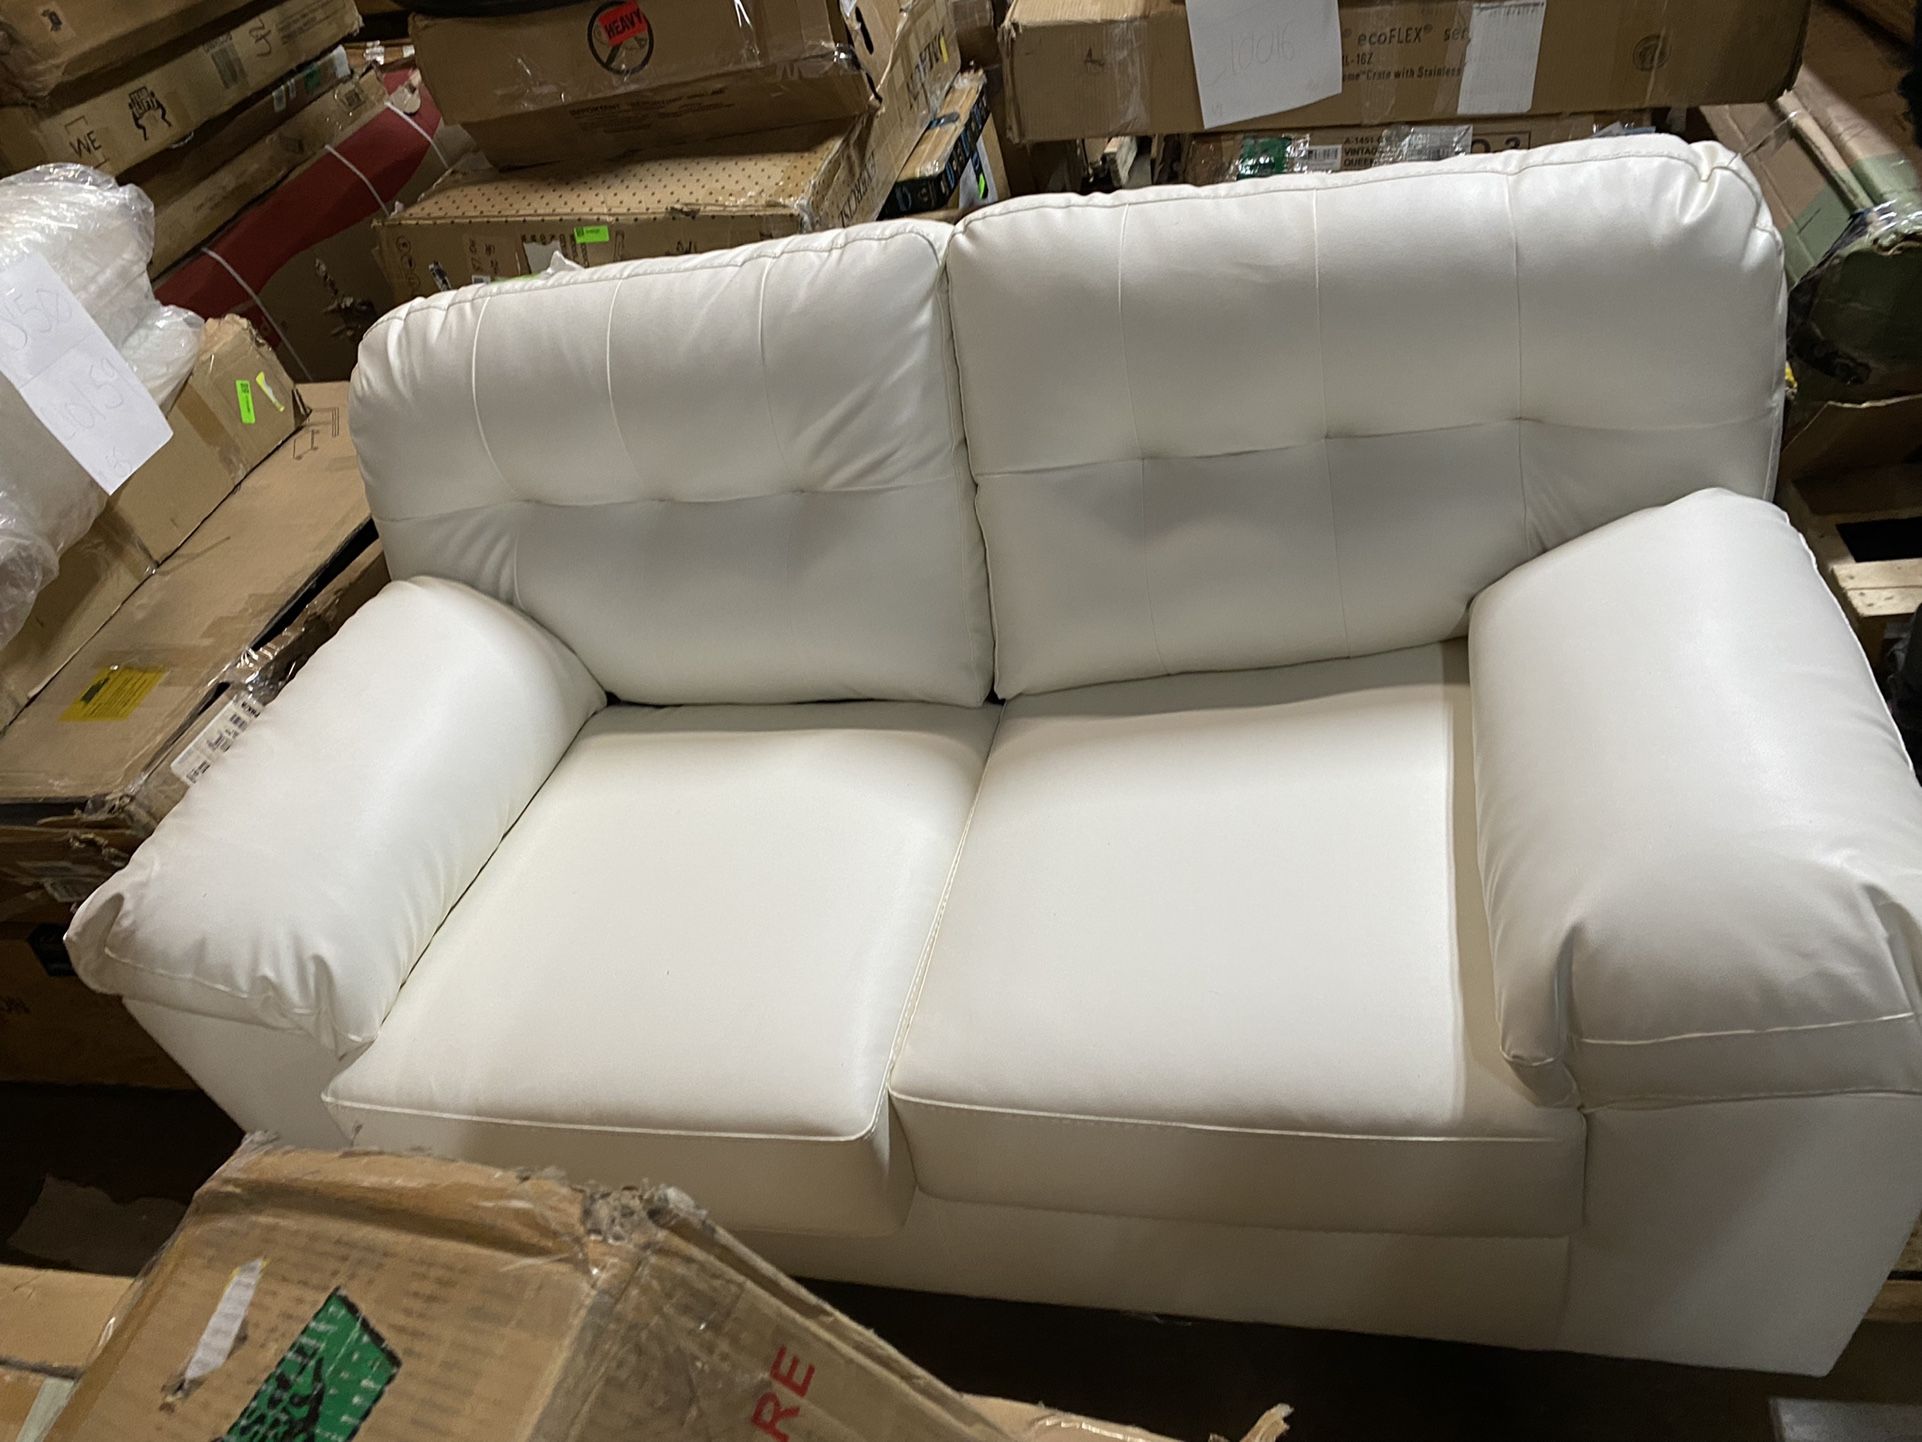 Brand New White Leather Sofa Loveseat Couch - FREE DELIVERY 🚚🛋